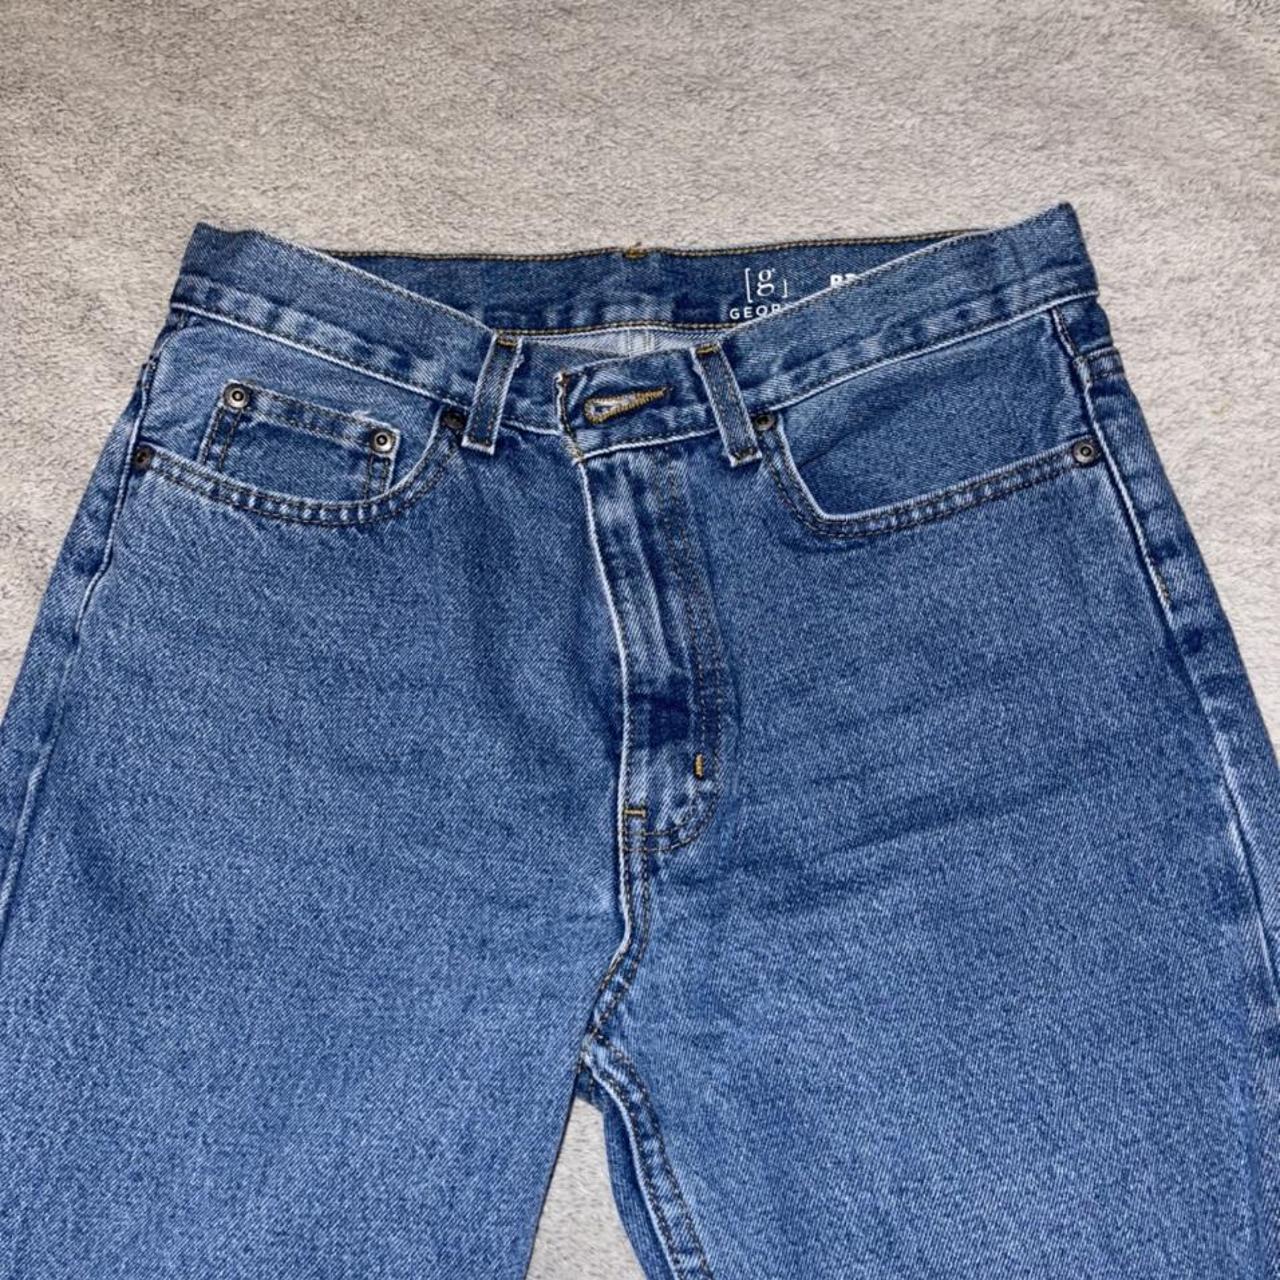 they are relaxed fit size 29x30 used a small amount... - Depop